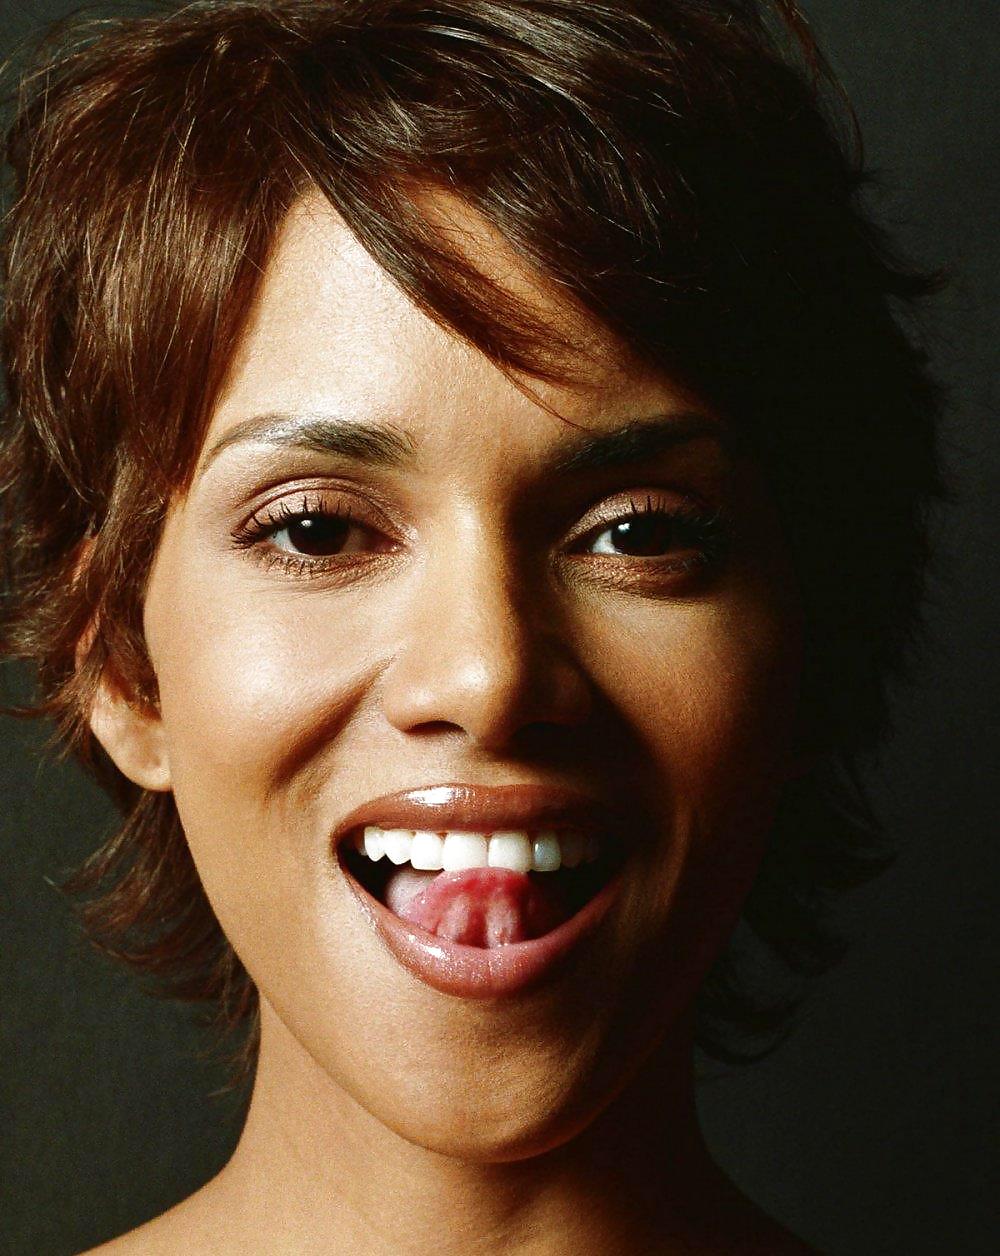 Halle berry ultimate glamour, scollatura, tappi
 #8353264